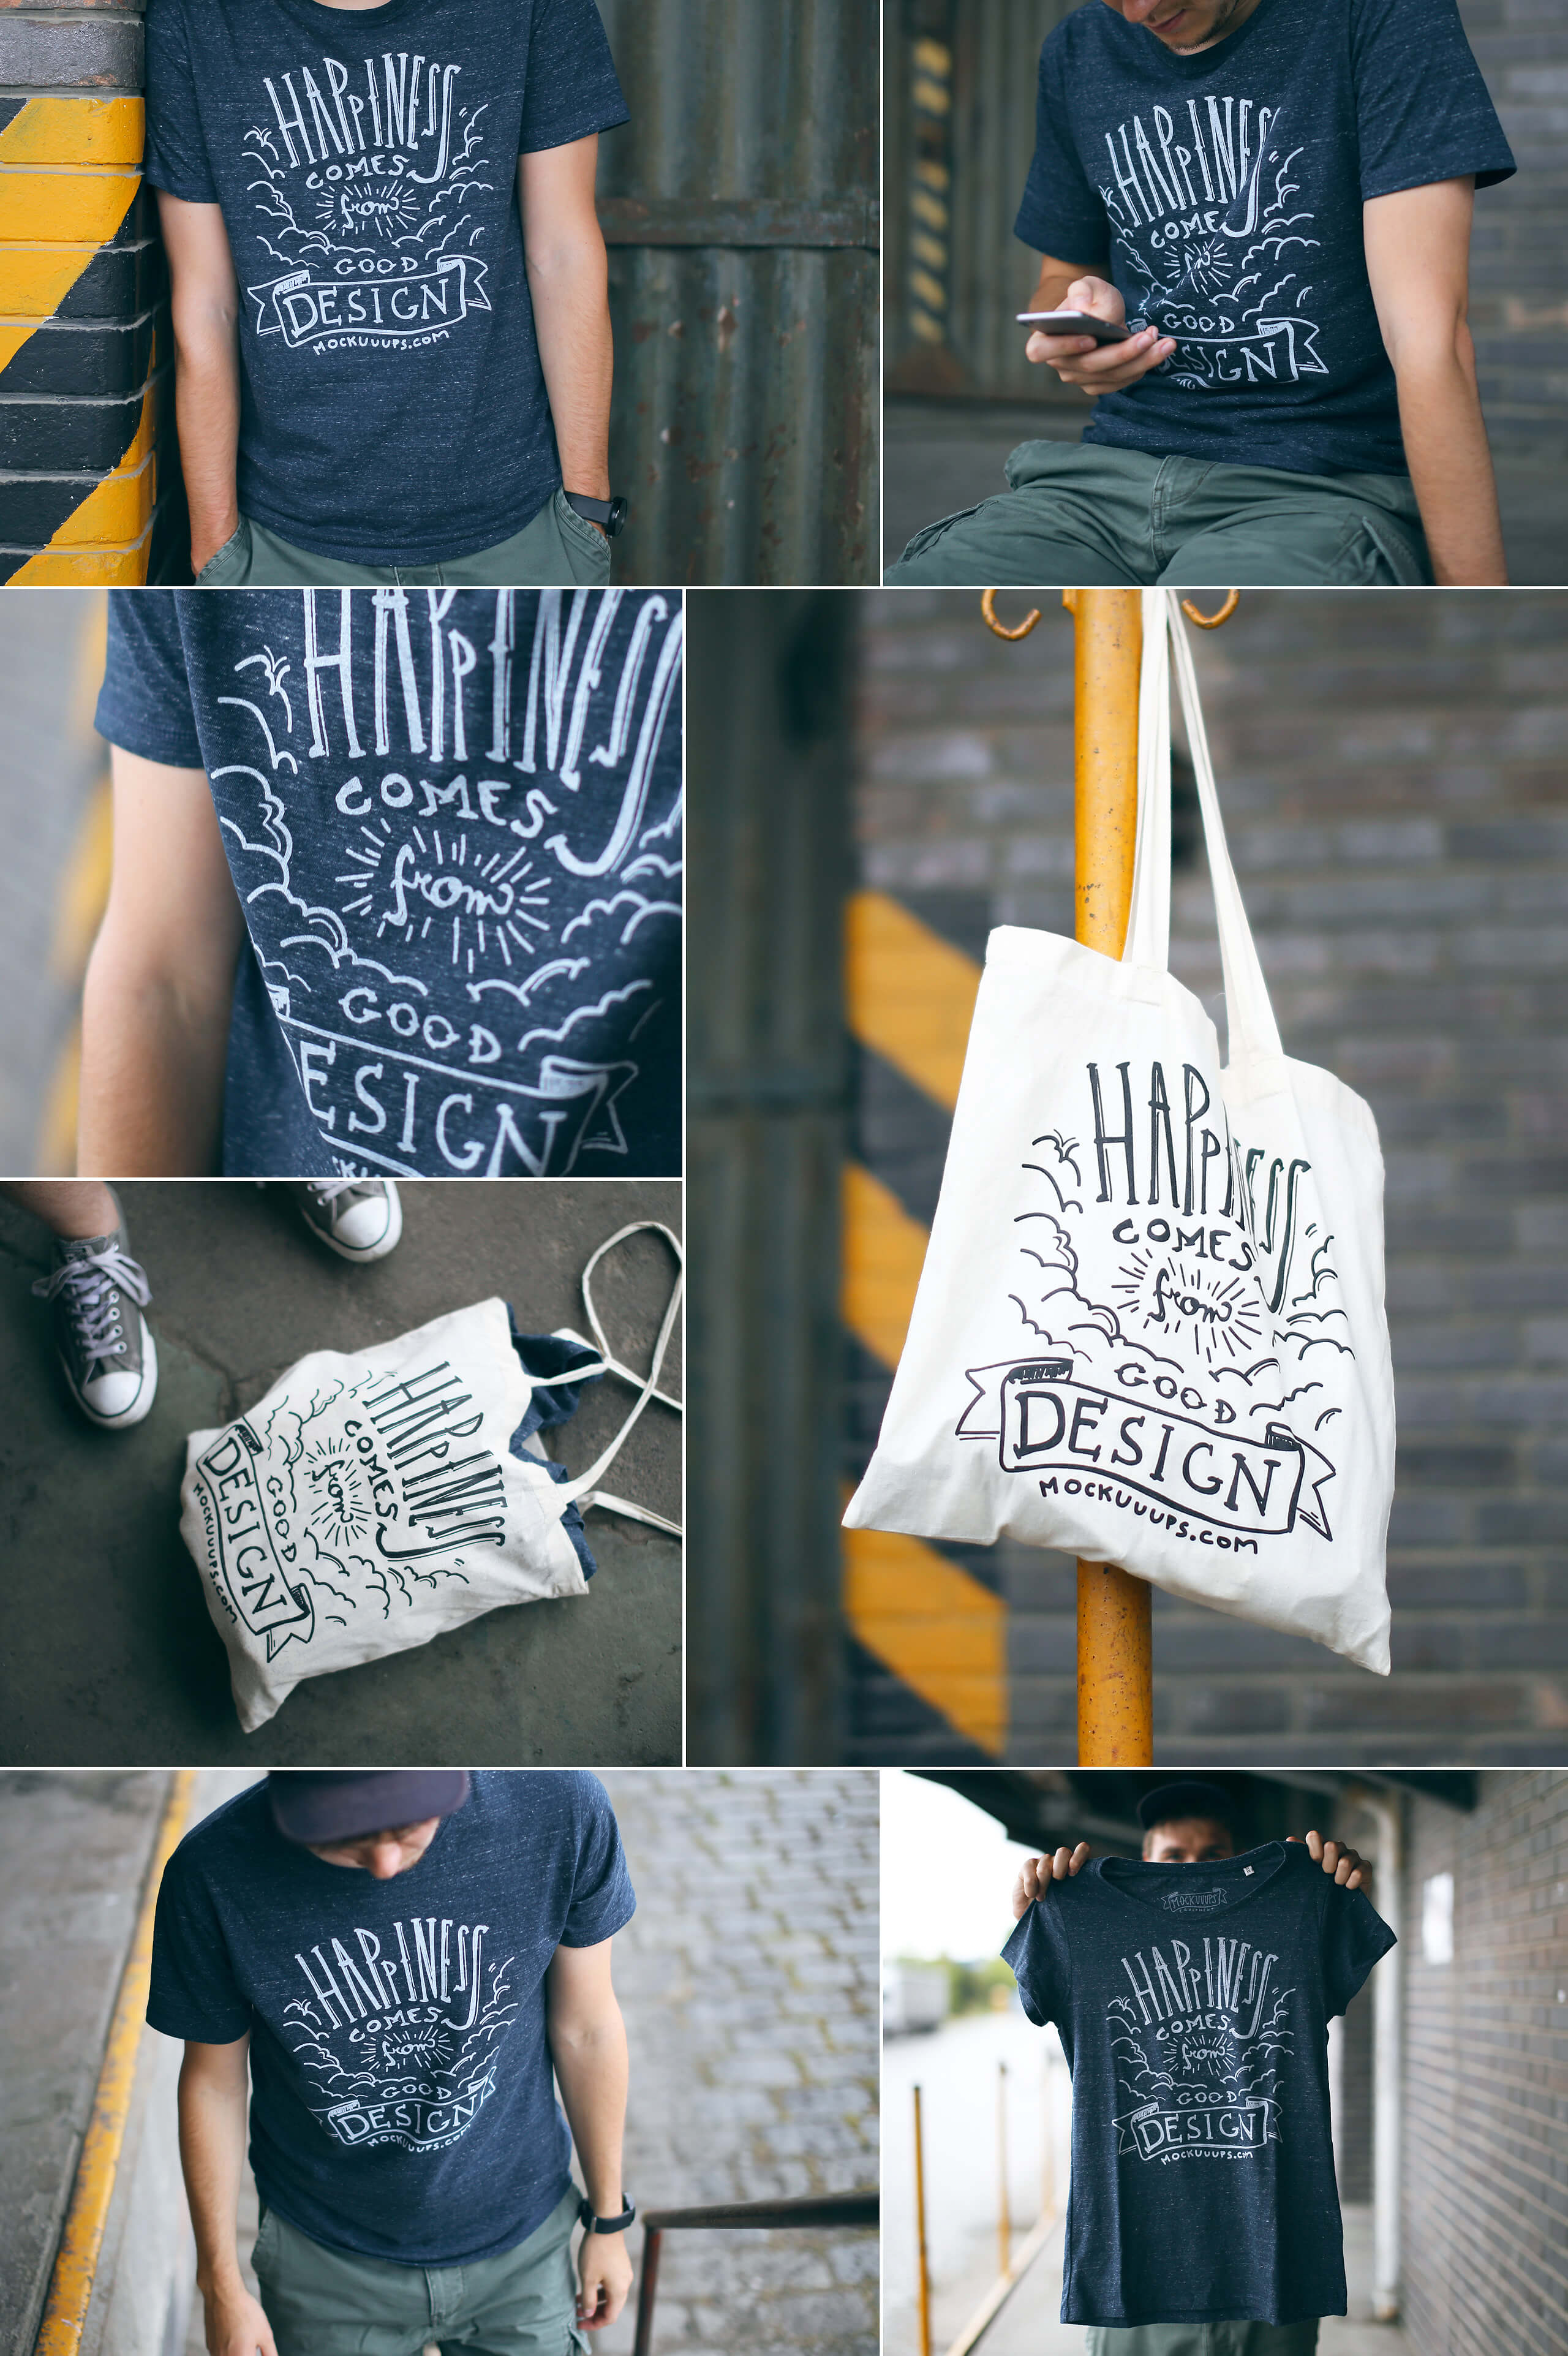 Mockuuups Equipment lookbook. Photos of people wearing t-shirts and canvas bags with impring of "Happiness Comes from Good Design"
